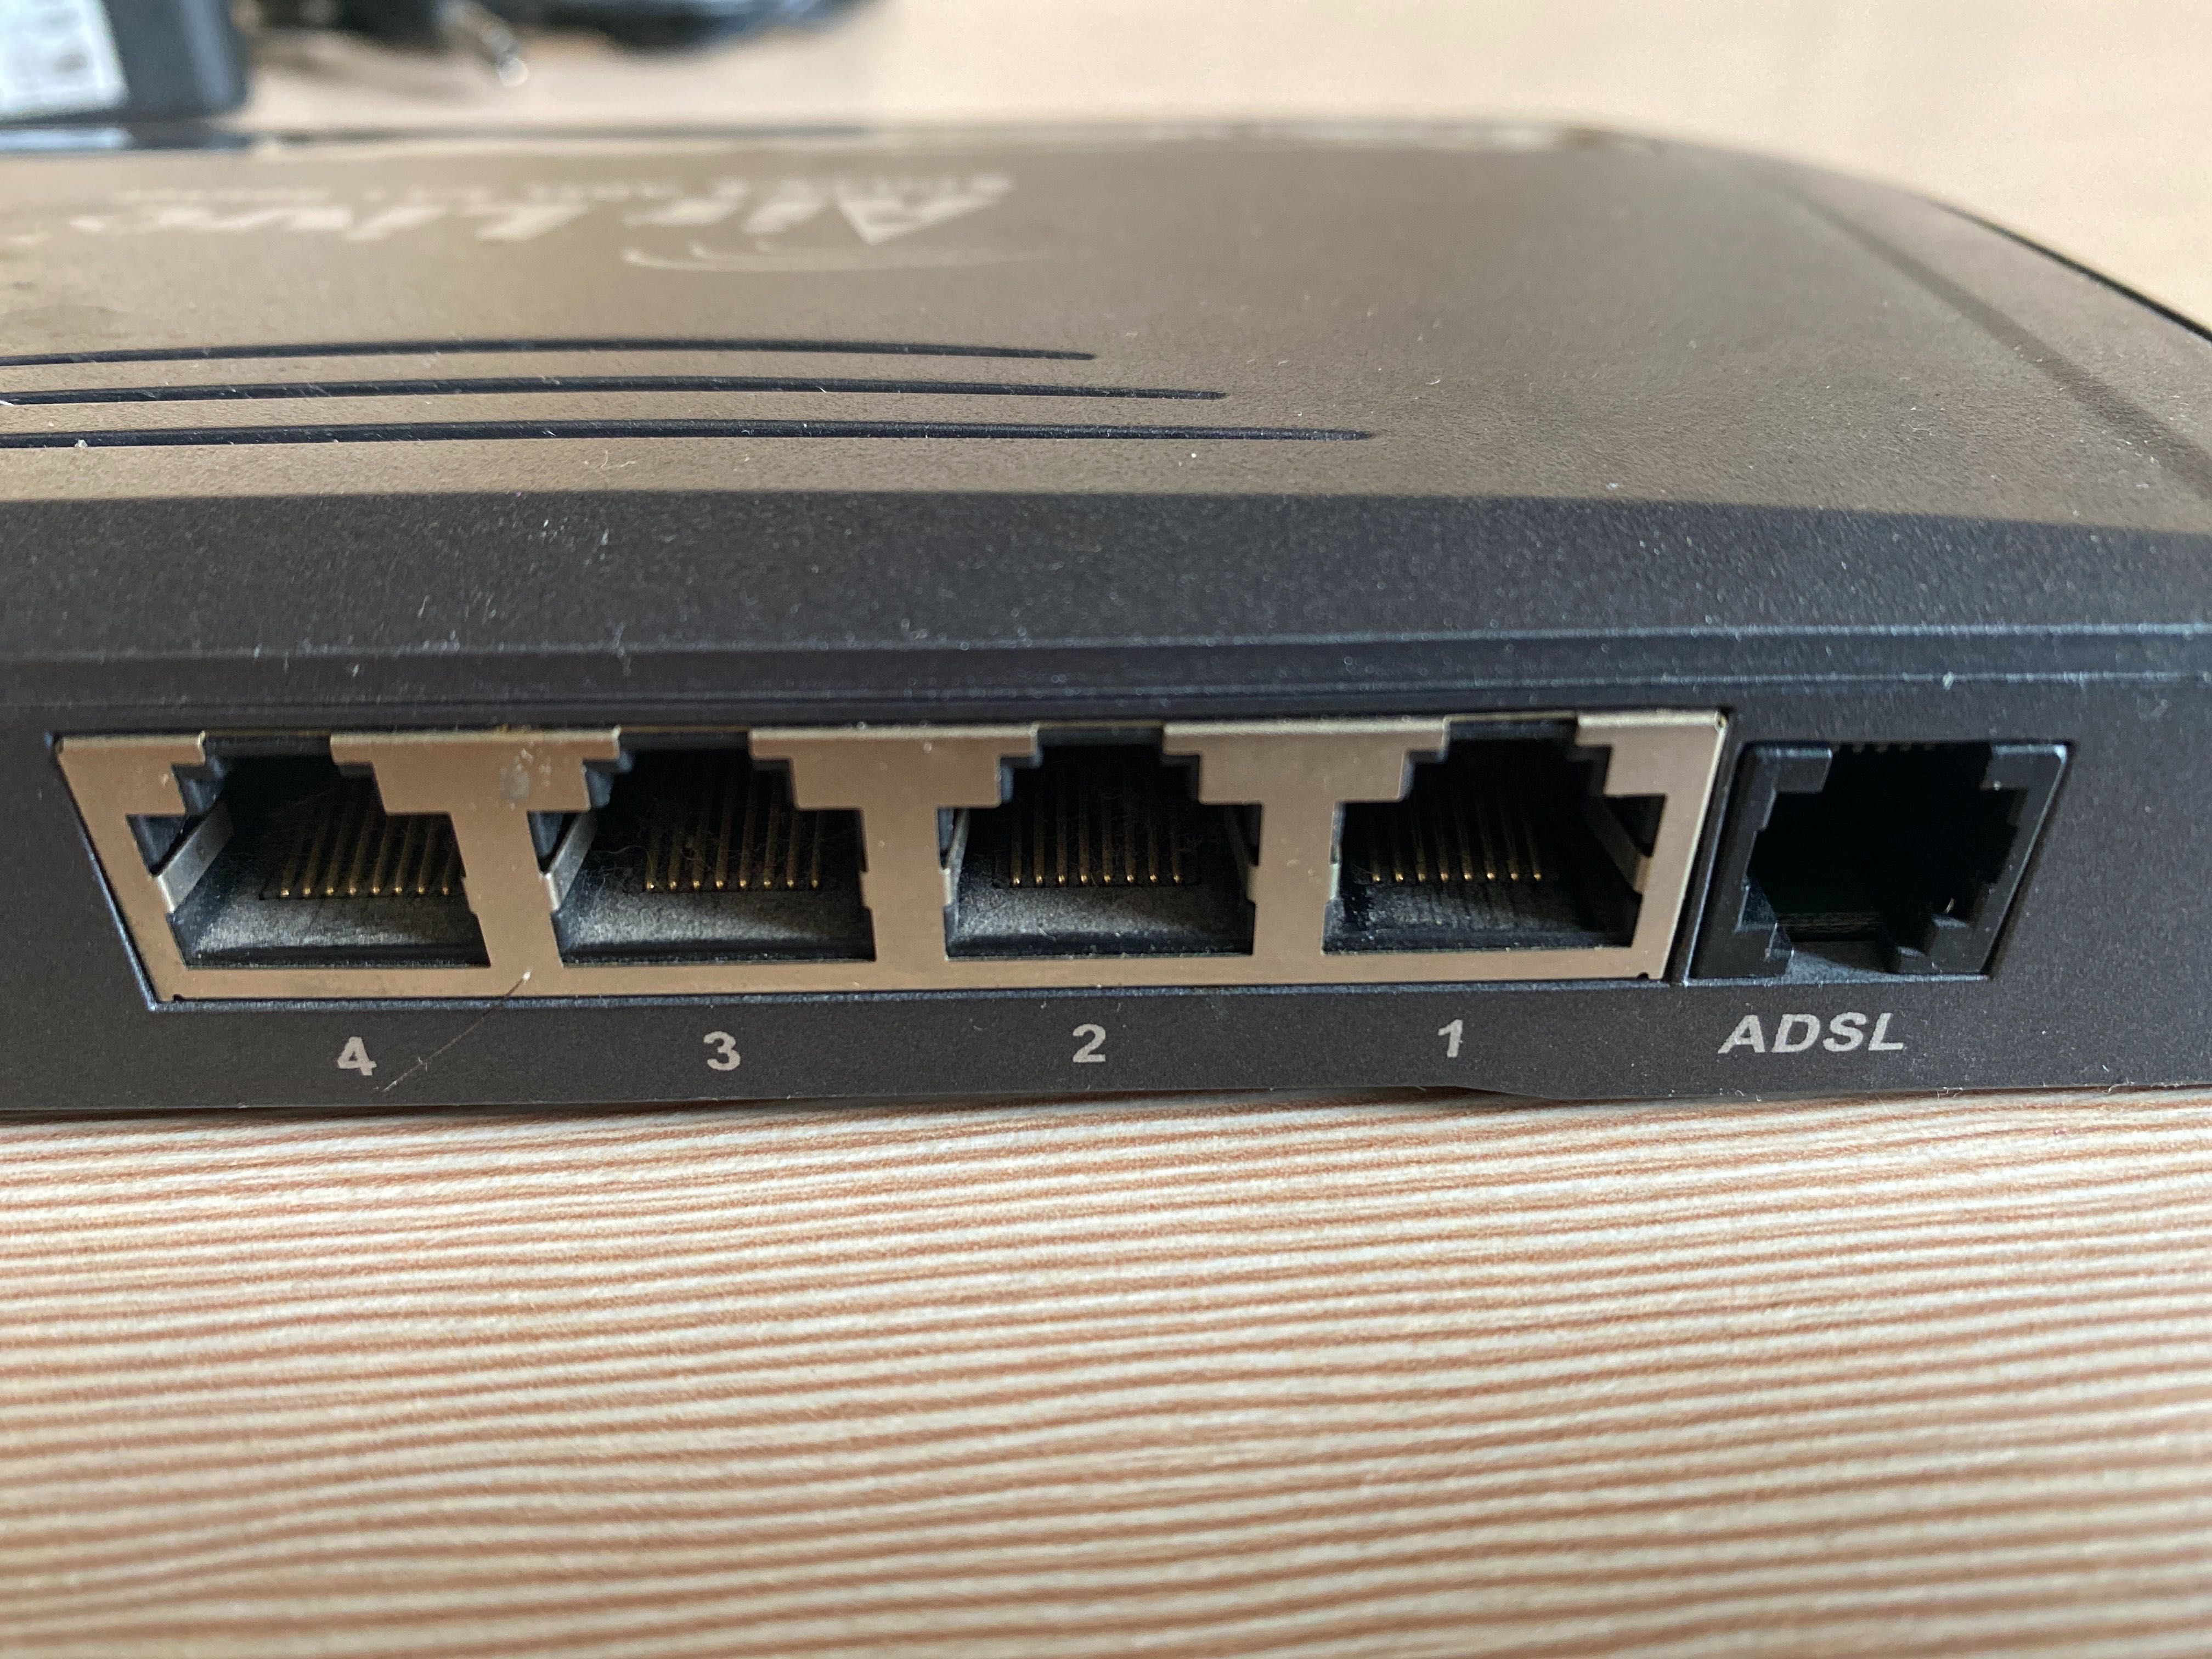 Router AirLive WT 2000ARM ADSL